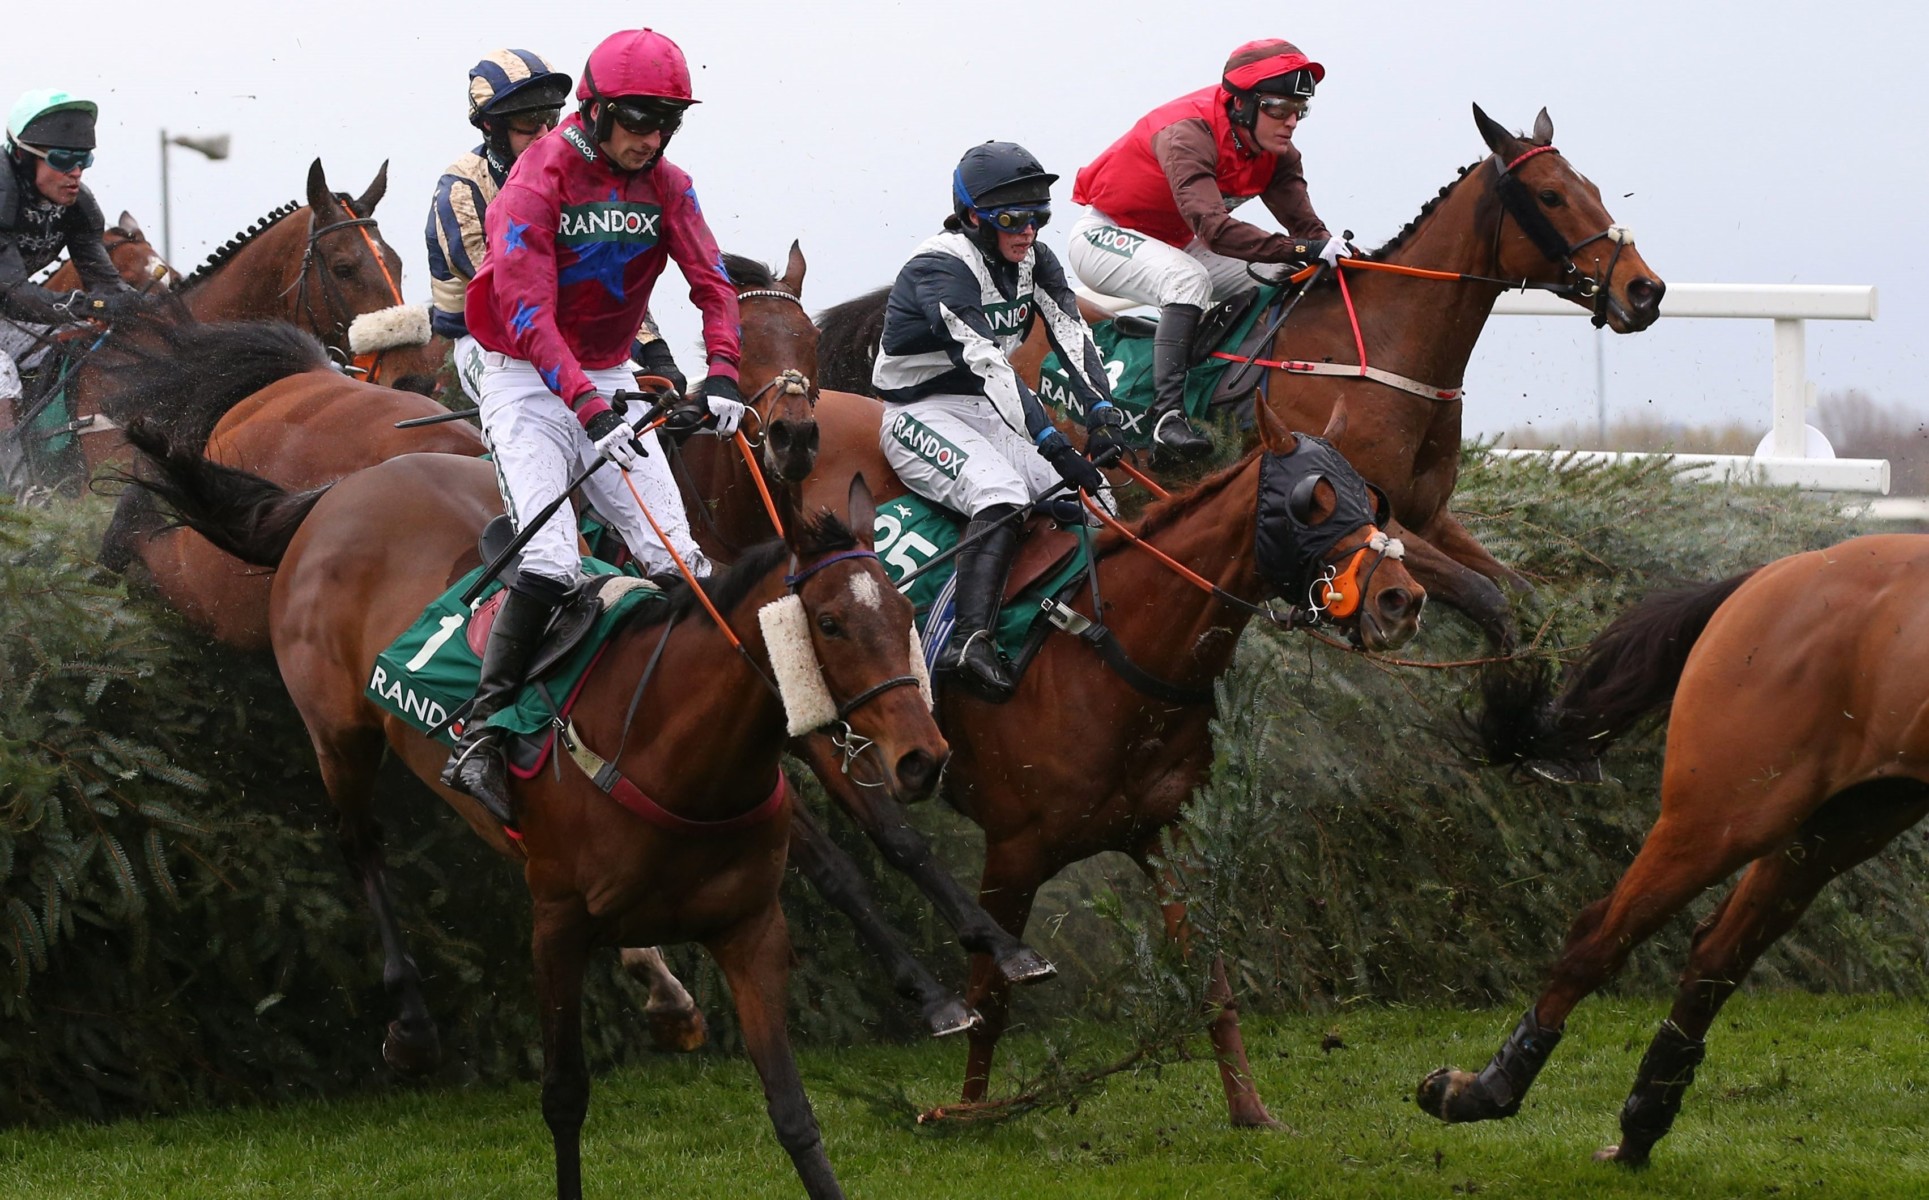 Chris reckons the Grand National is one of the best sporting events in the world